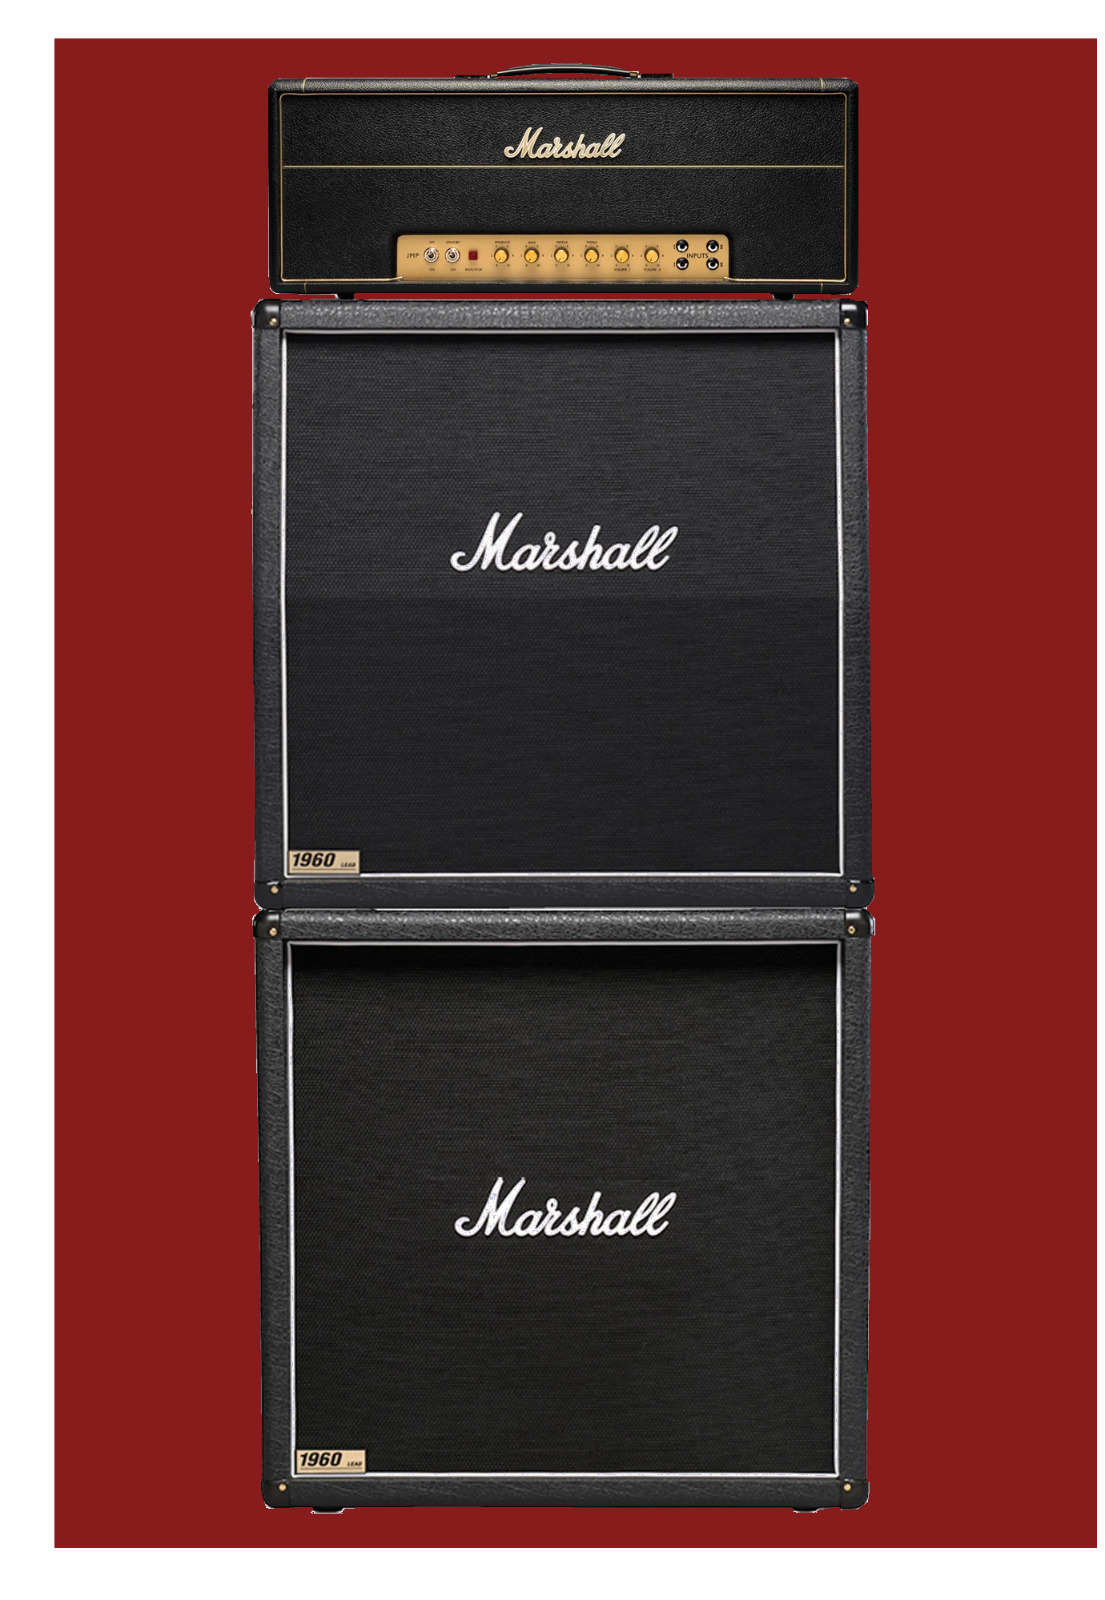 MARSHALL AMP - FRIG PHOTO MAGNET - TURN IT TO ELEVEN AND RIP THE KNOB OFF 